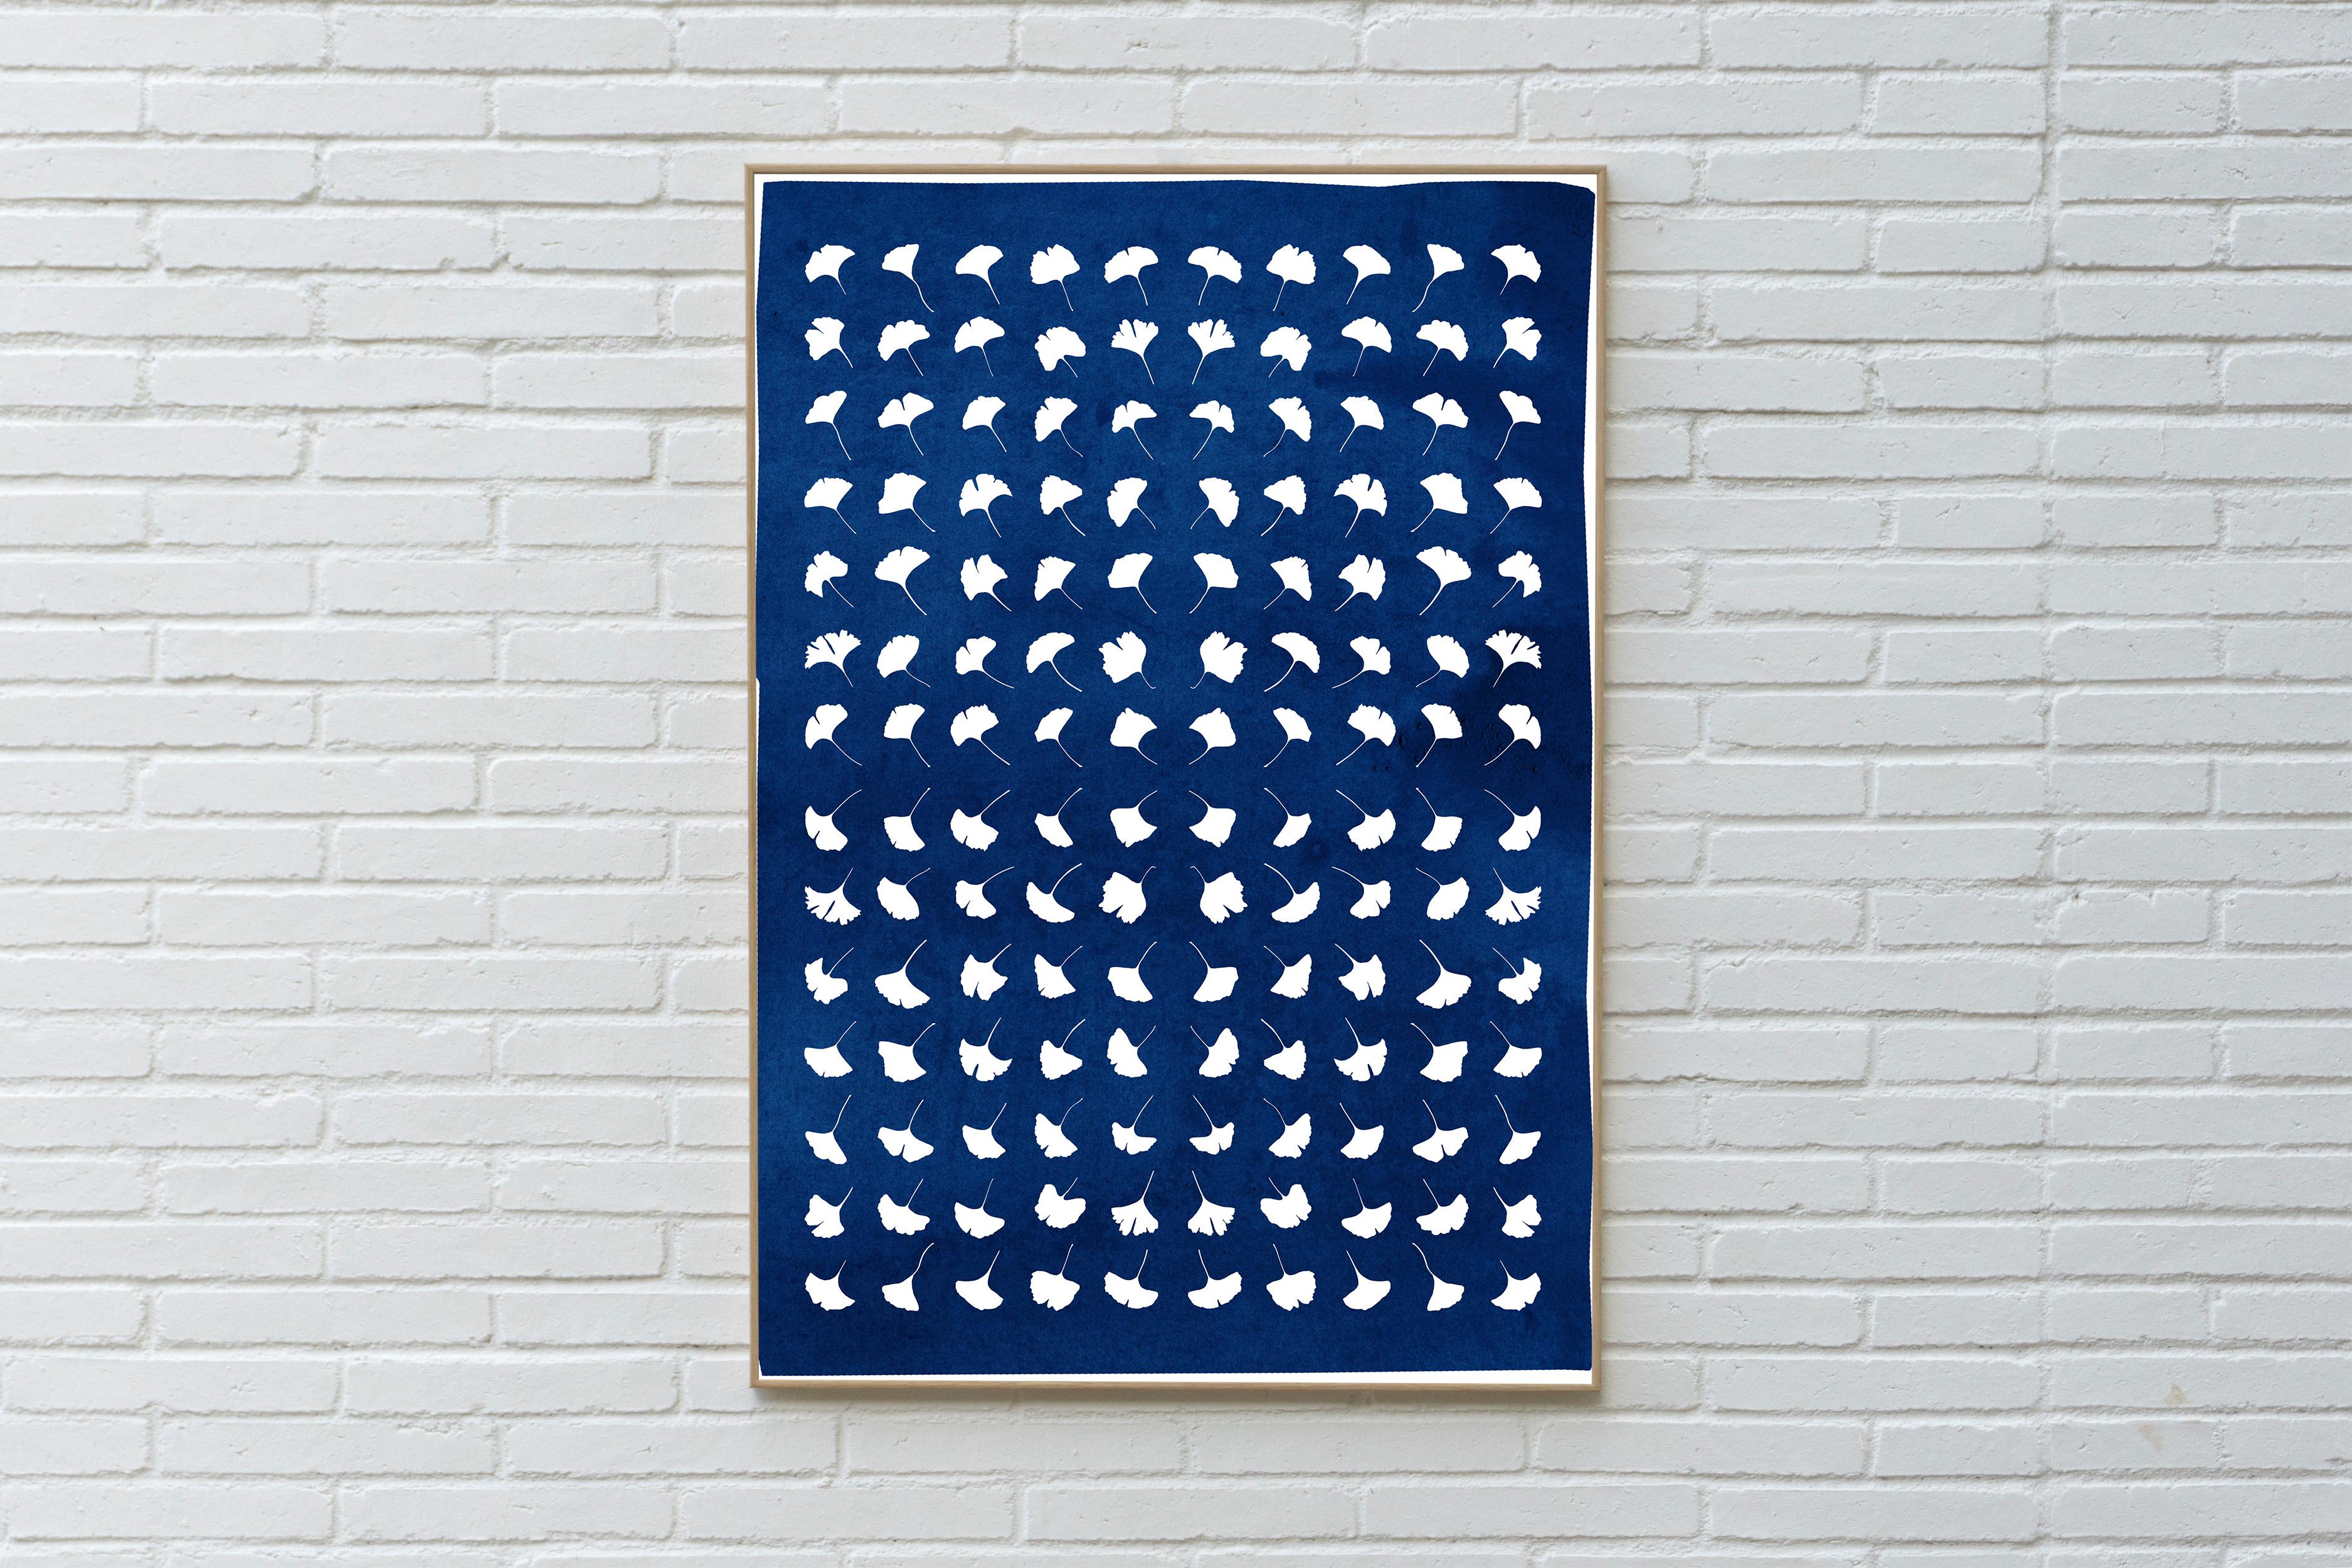 This is an exclusive handprinted limited edition cyanotype.

Details:
+ Title: Gingko Leaf Explosion
+ Year: 2024
+ Edition Size: 100
+ Stamped and Certificate of Authenticity provided
+ Measurements : 70x100 cm (28x 40 in.), a standard frame size
+